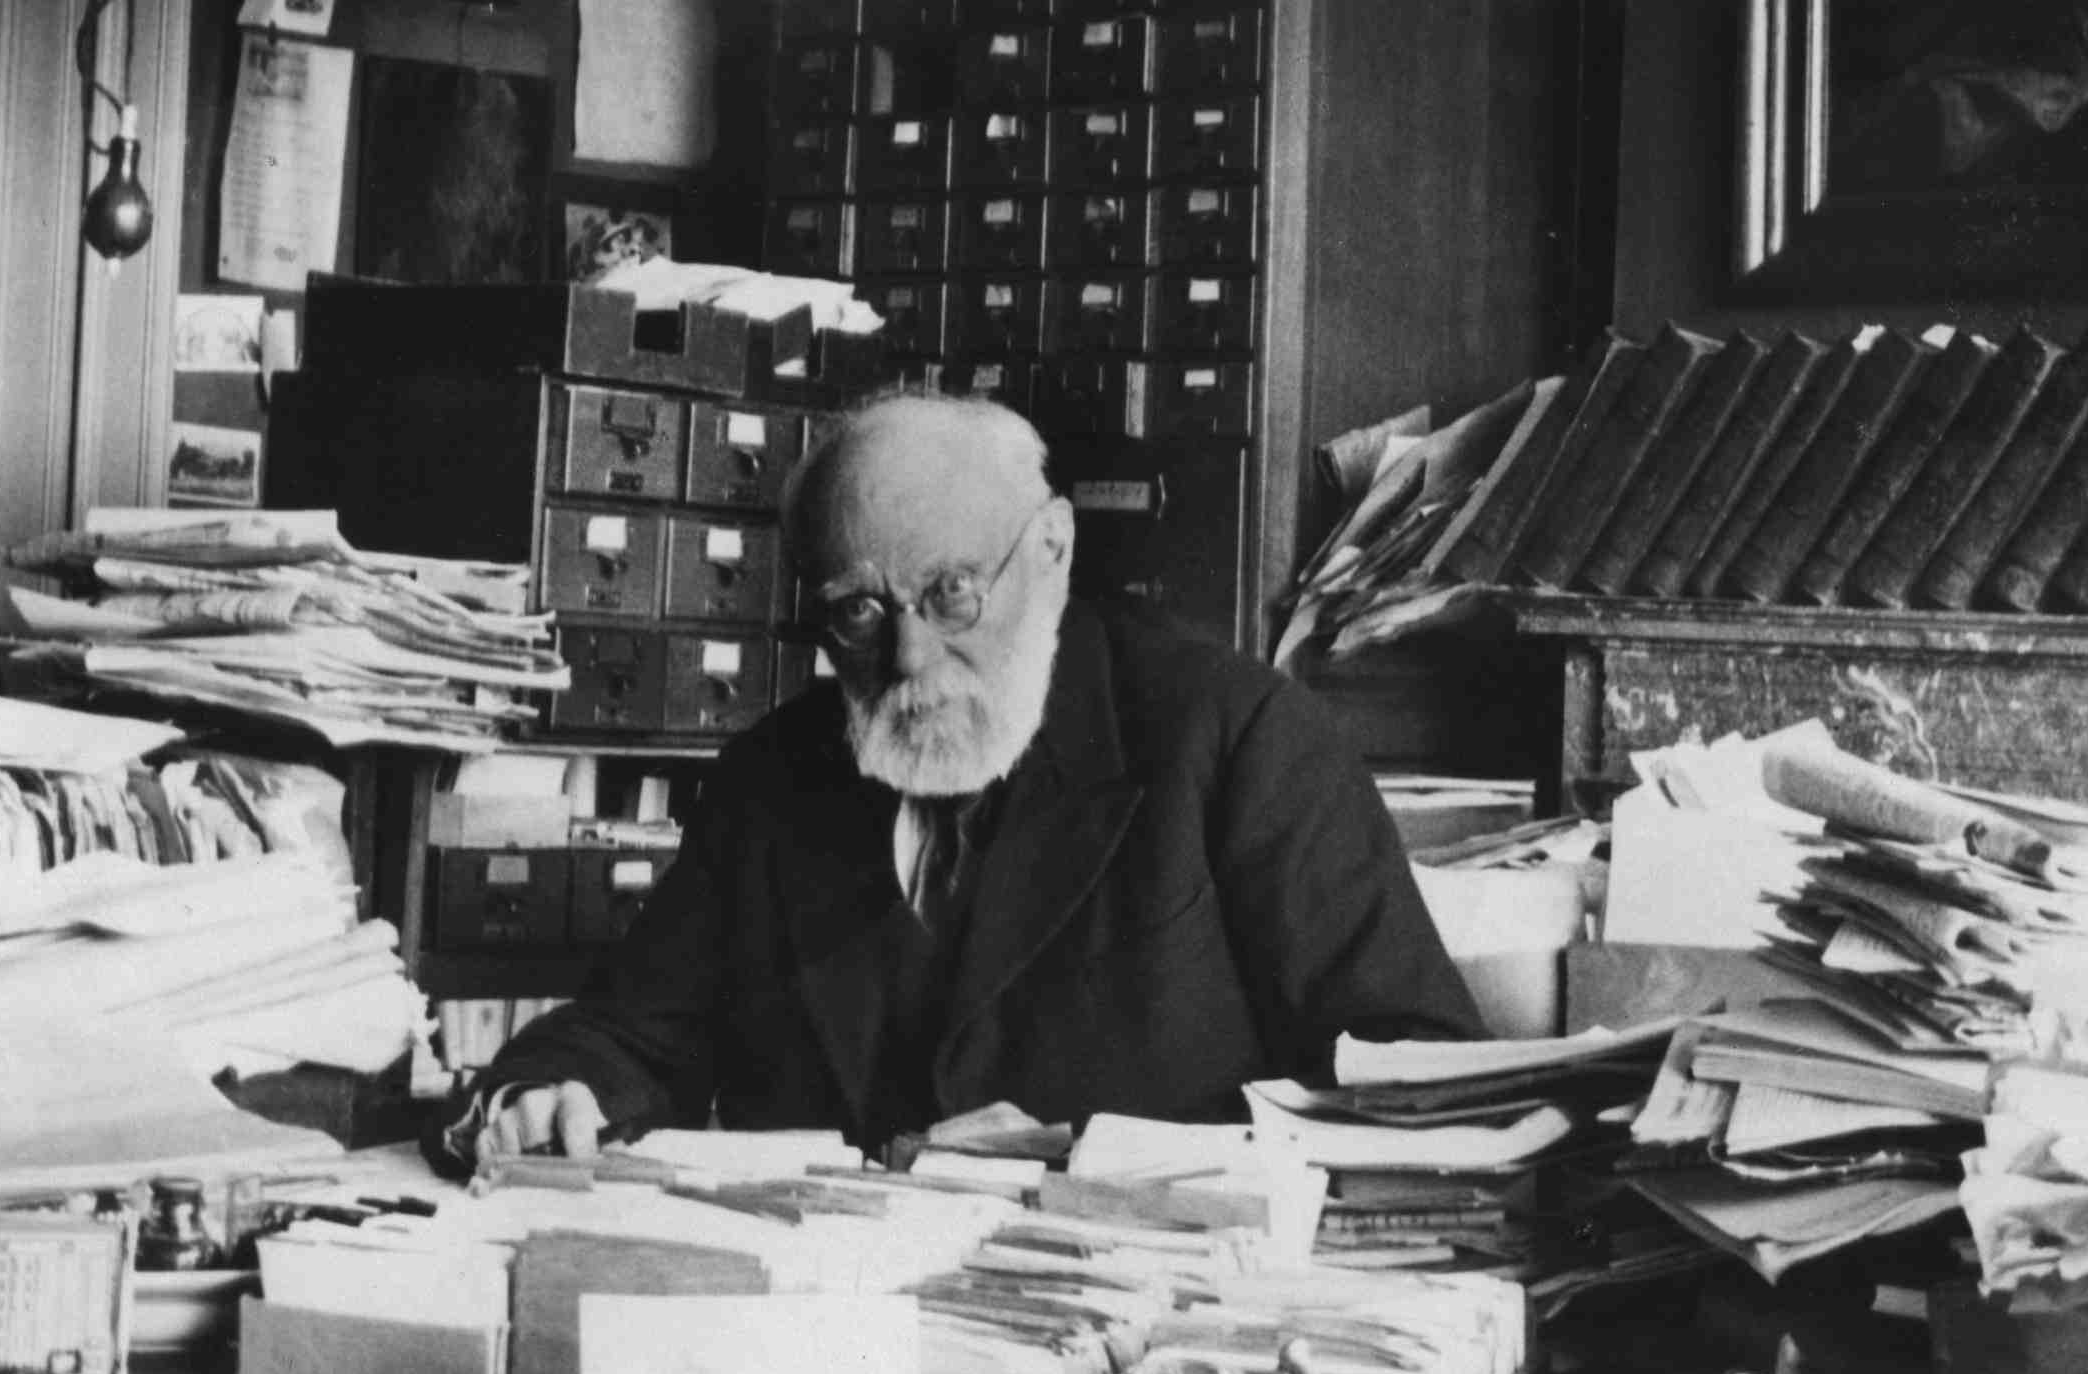 Paul Otlet at his desk in 1934